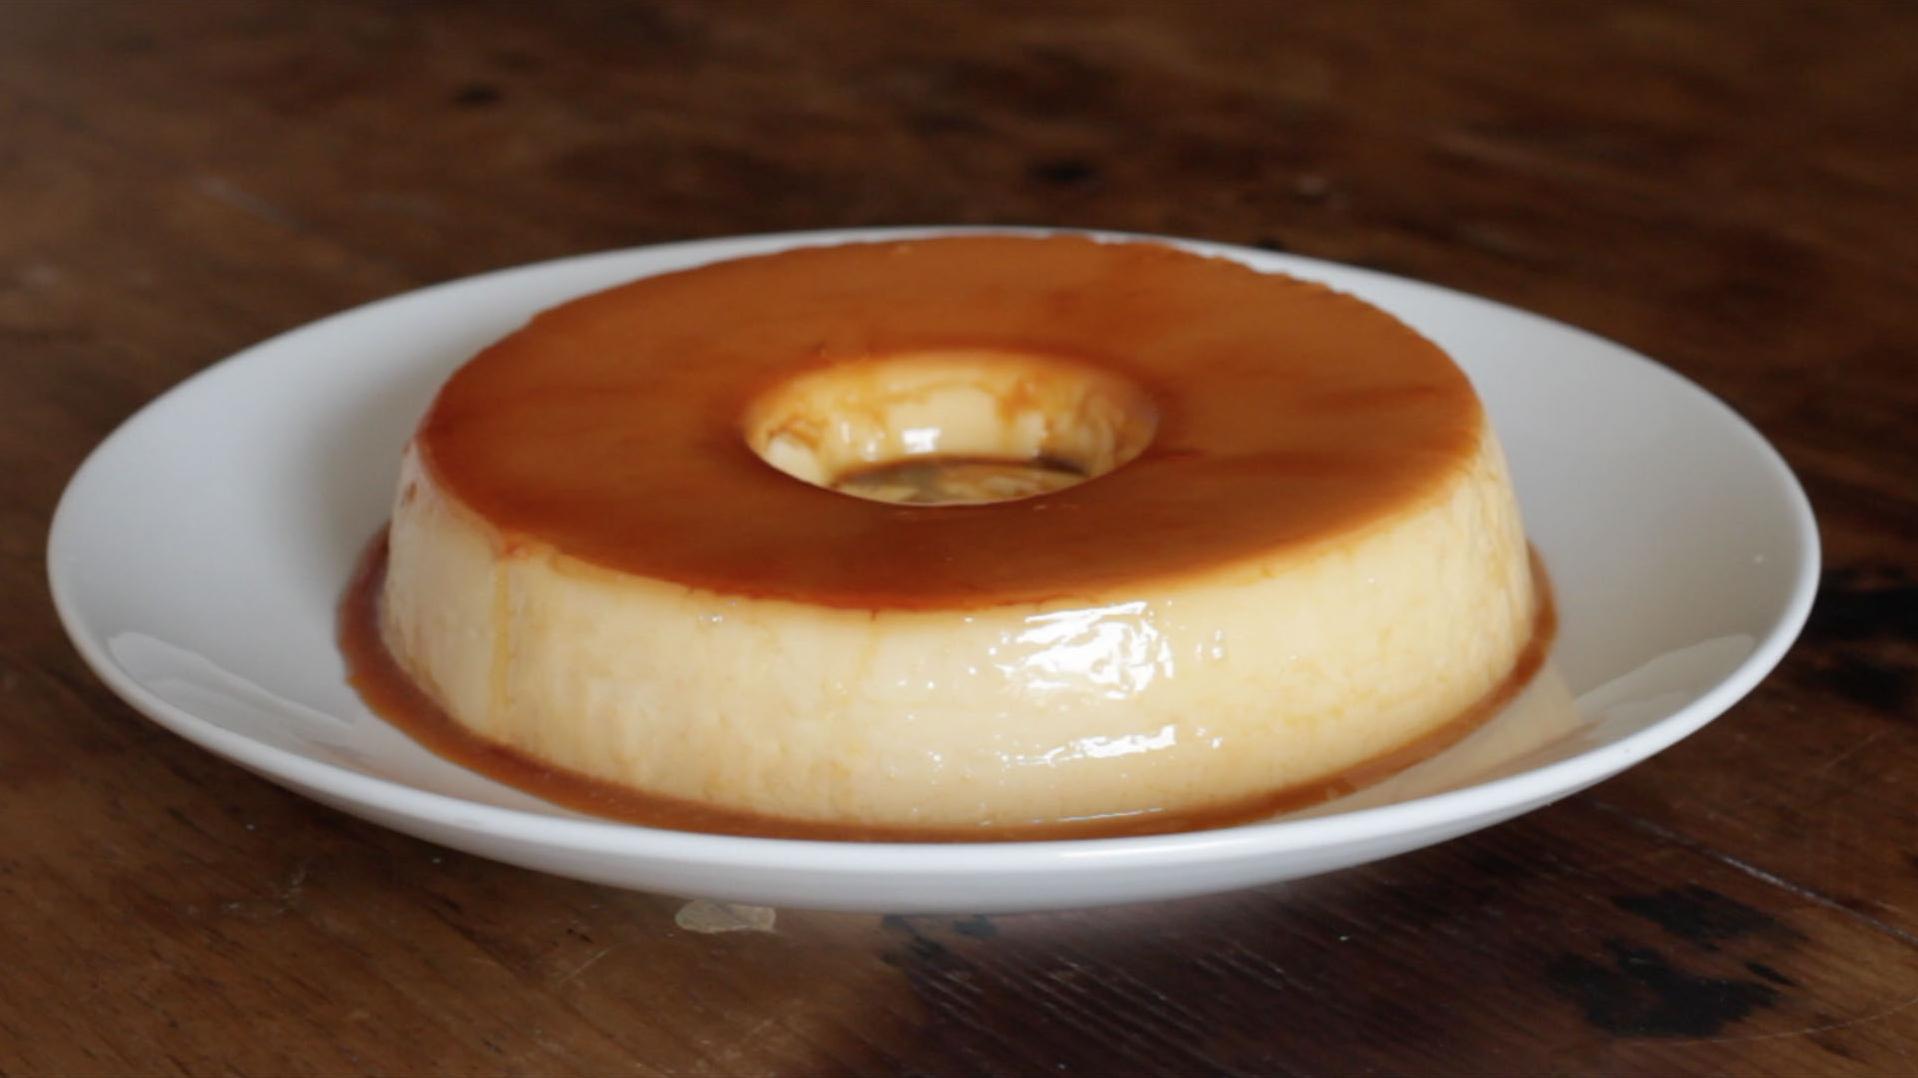  This flan is the perfect balance between creamy and custardy textures.